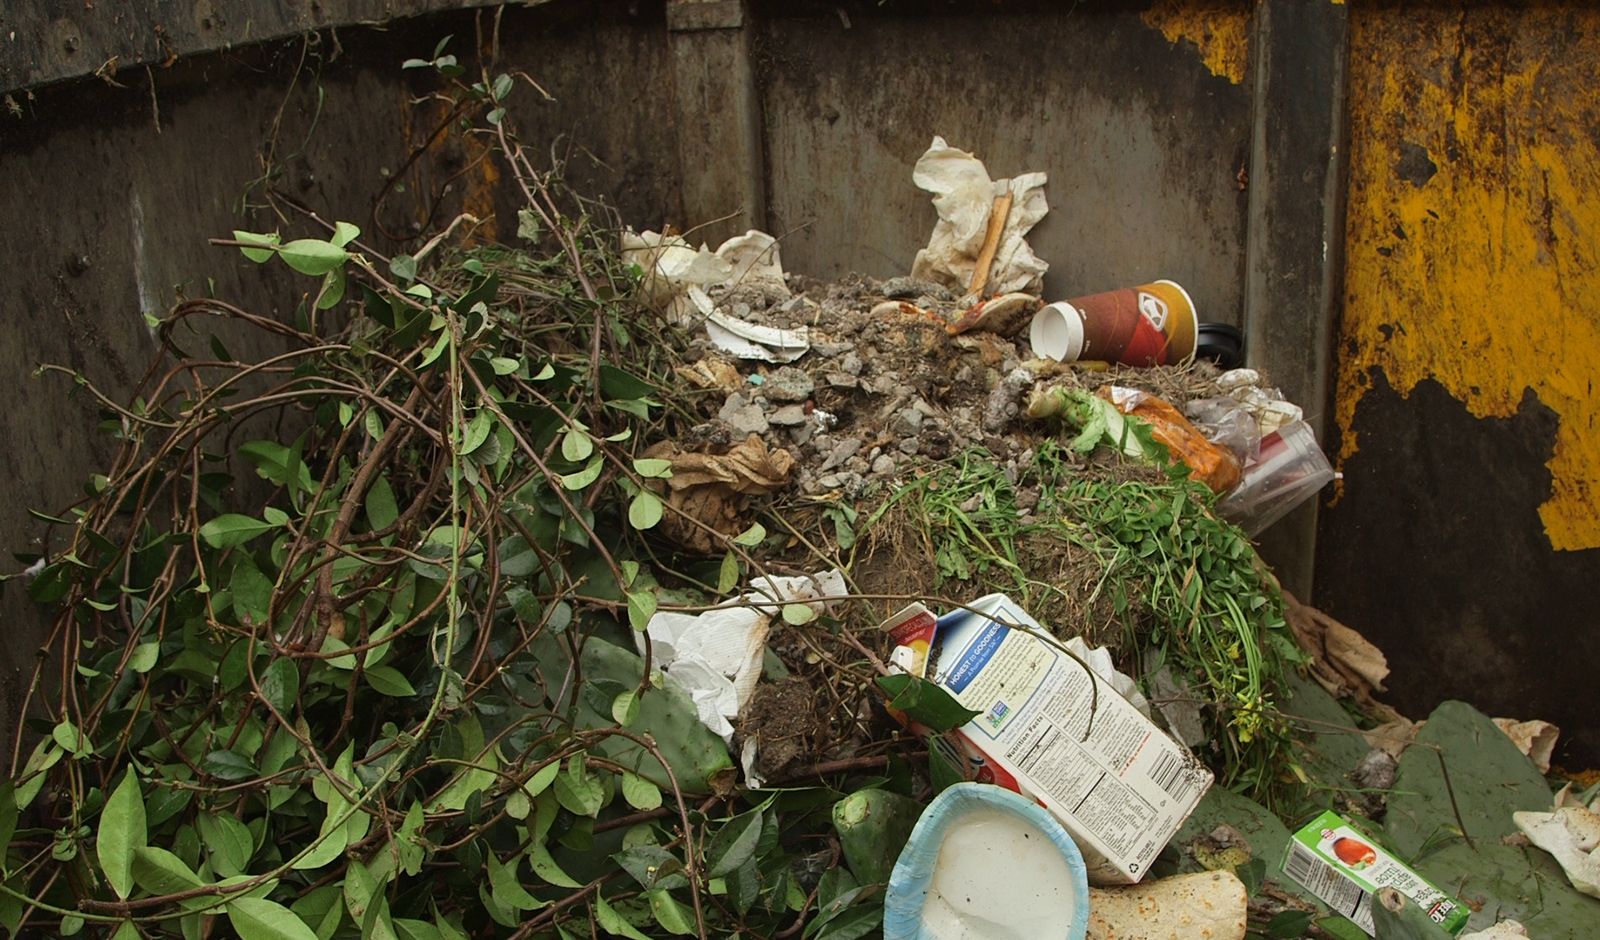 Green waste includes branches, paper, food scraps and every other product that has been alive in your lifetime.